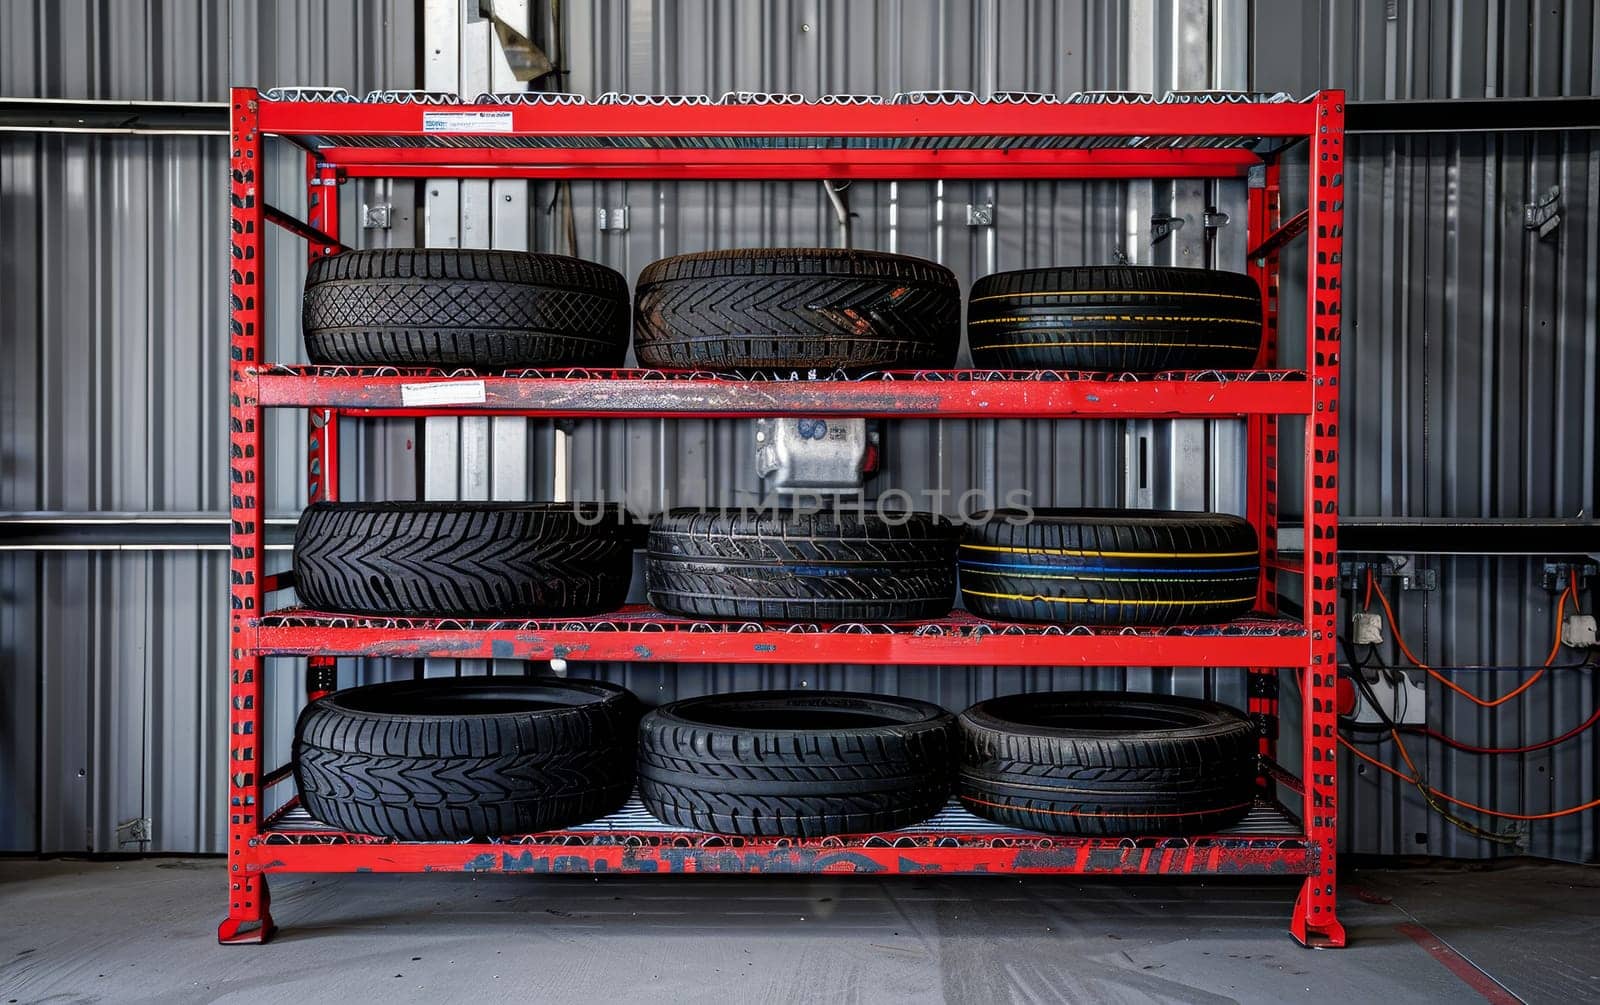 A vibrant red rack filled with car tires stands prominently in an automotive repair facility, the bold color signifying urgency and importance in vehicle maintenance and safety